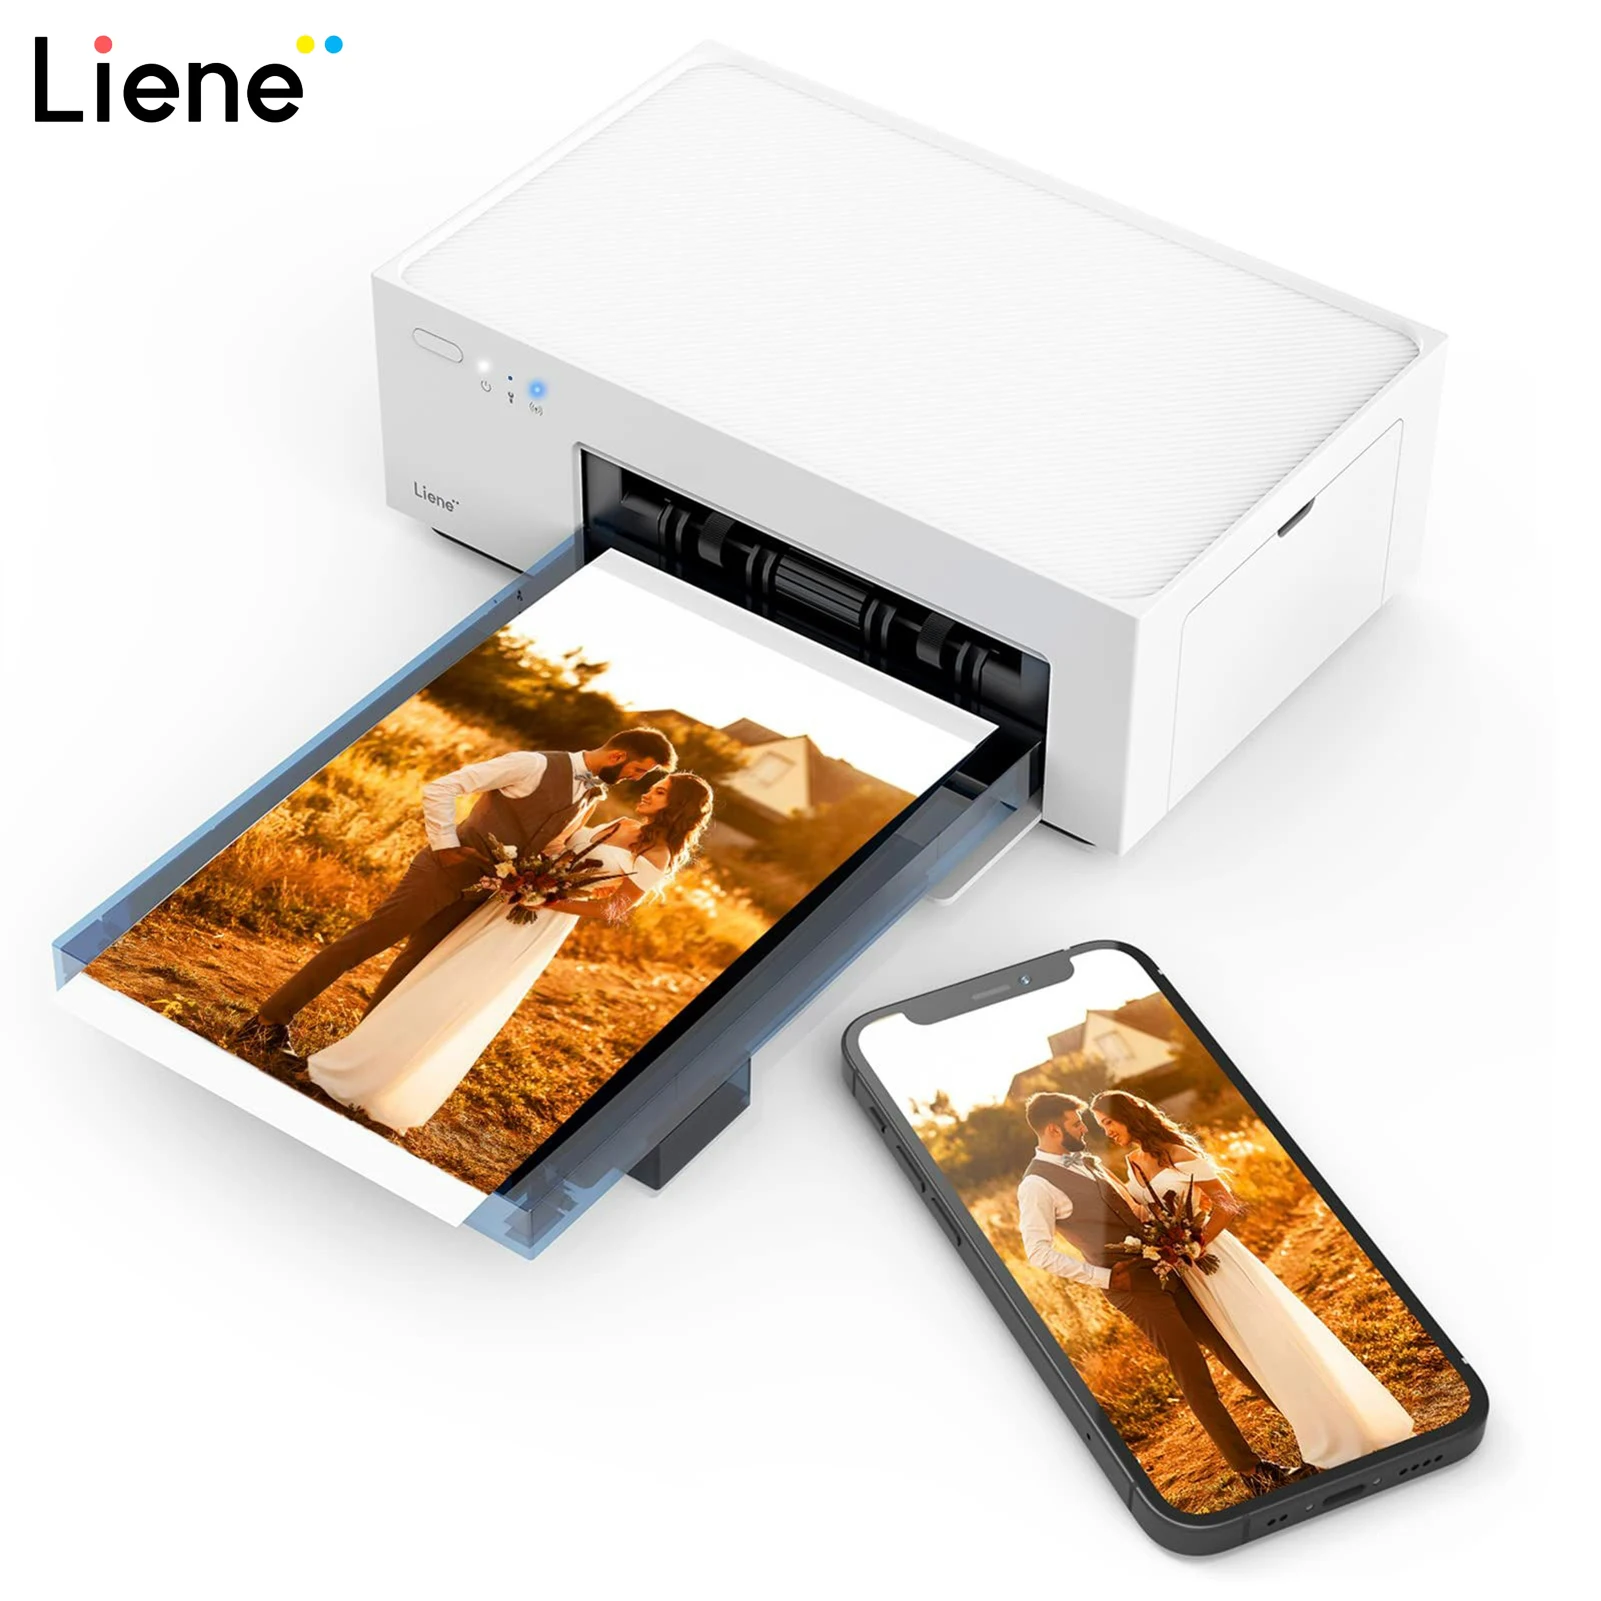 Liene 4x6'' Photo Printer Bundle (100 pcs +3 Ink Cartridges), Wi-Fi Picture  Printer for iPhone, Android, Smartphone, Computer, Dye-Sublimation